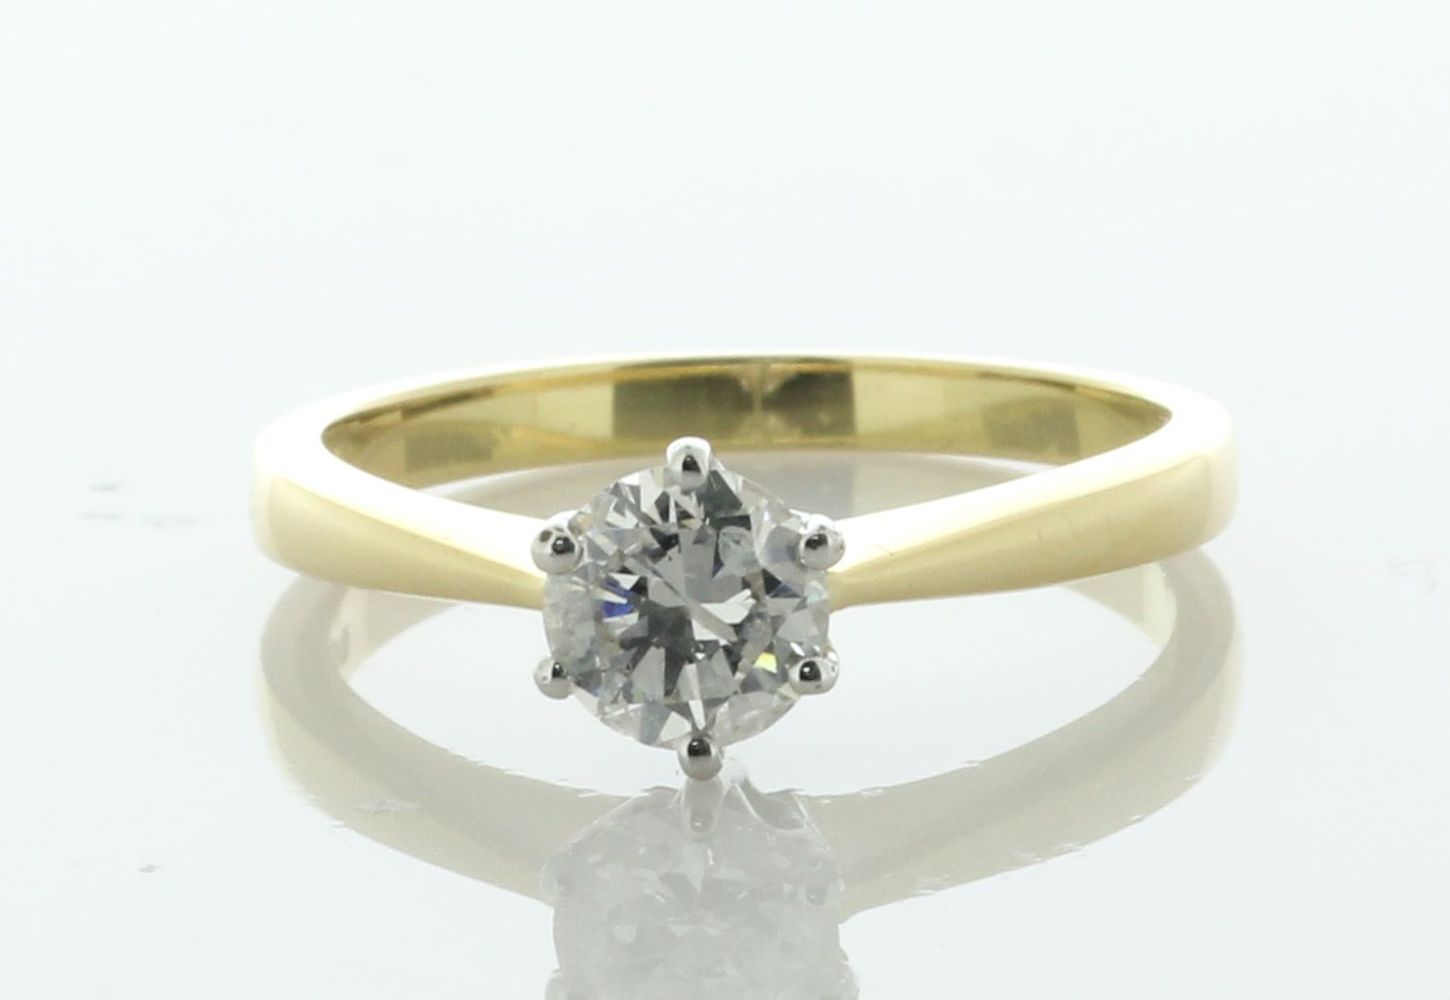  Rings, Necklaces, Earrings, Bracelets & Gemstones, Perfect for Every Style and Occasion